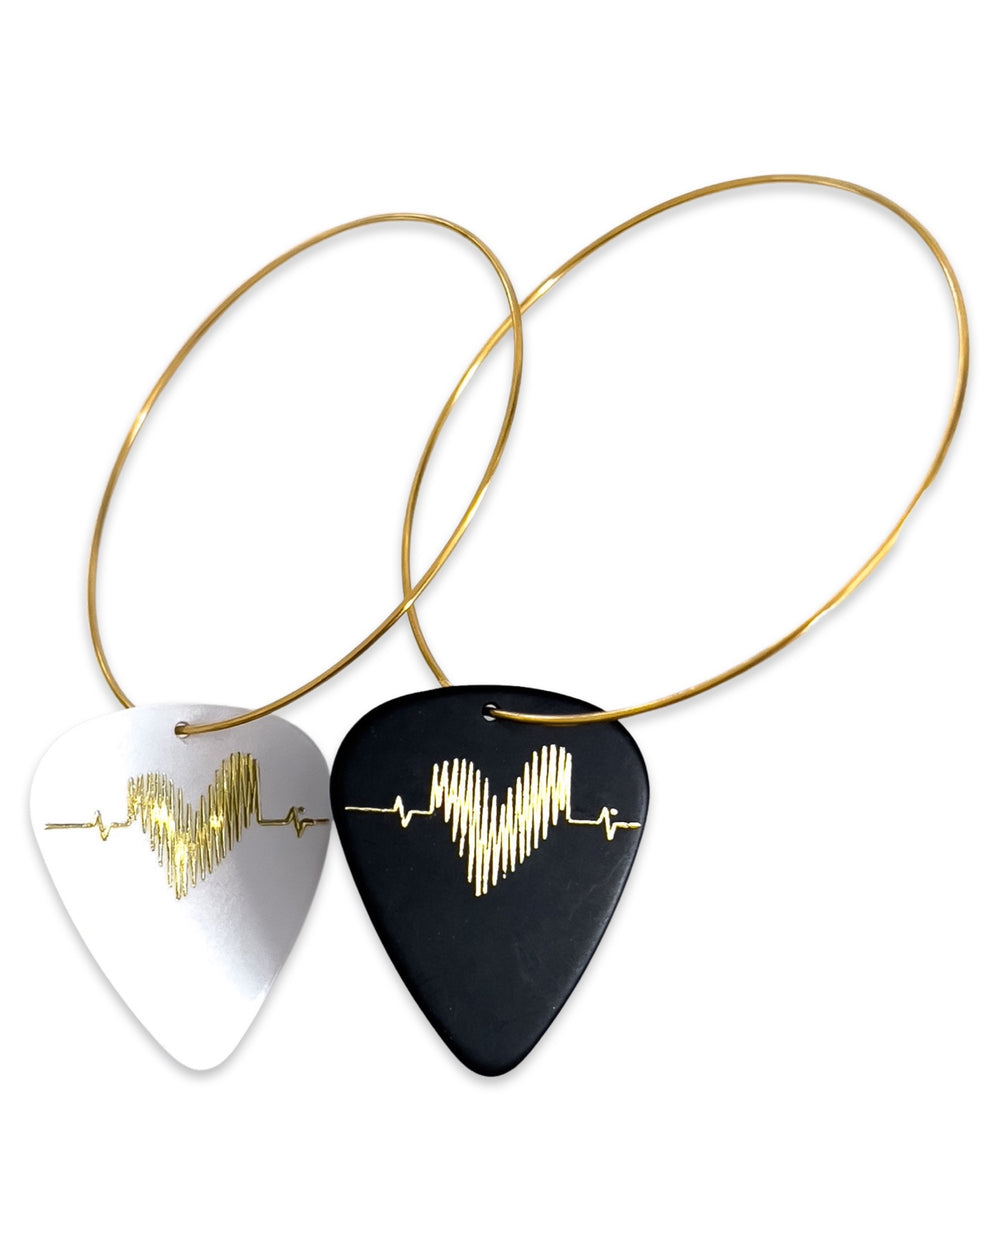 WS Inhale/Exhale Mix Match Reversible Single Guitar Pick Earrings